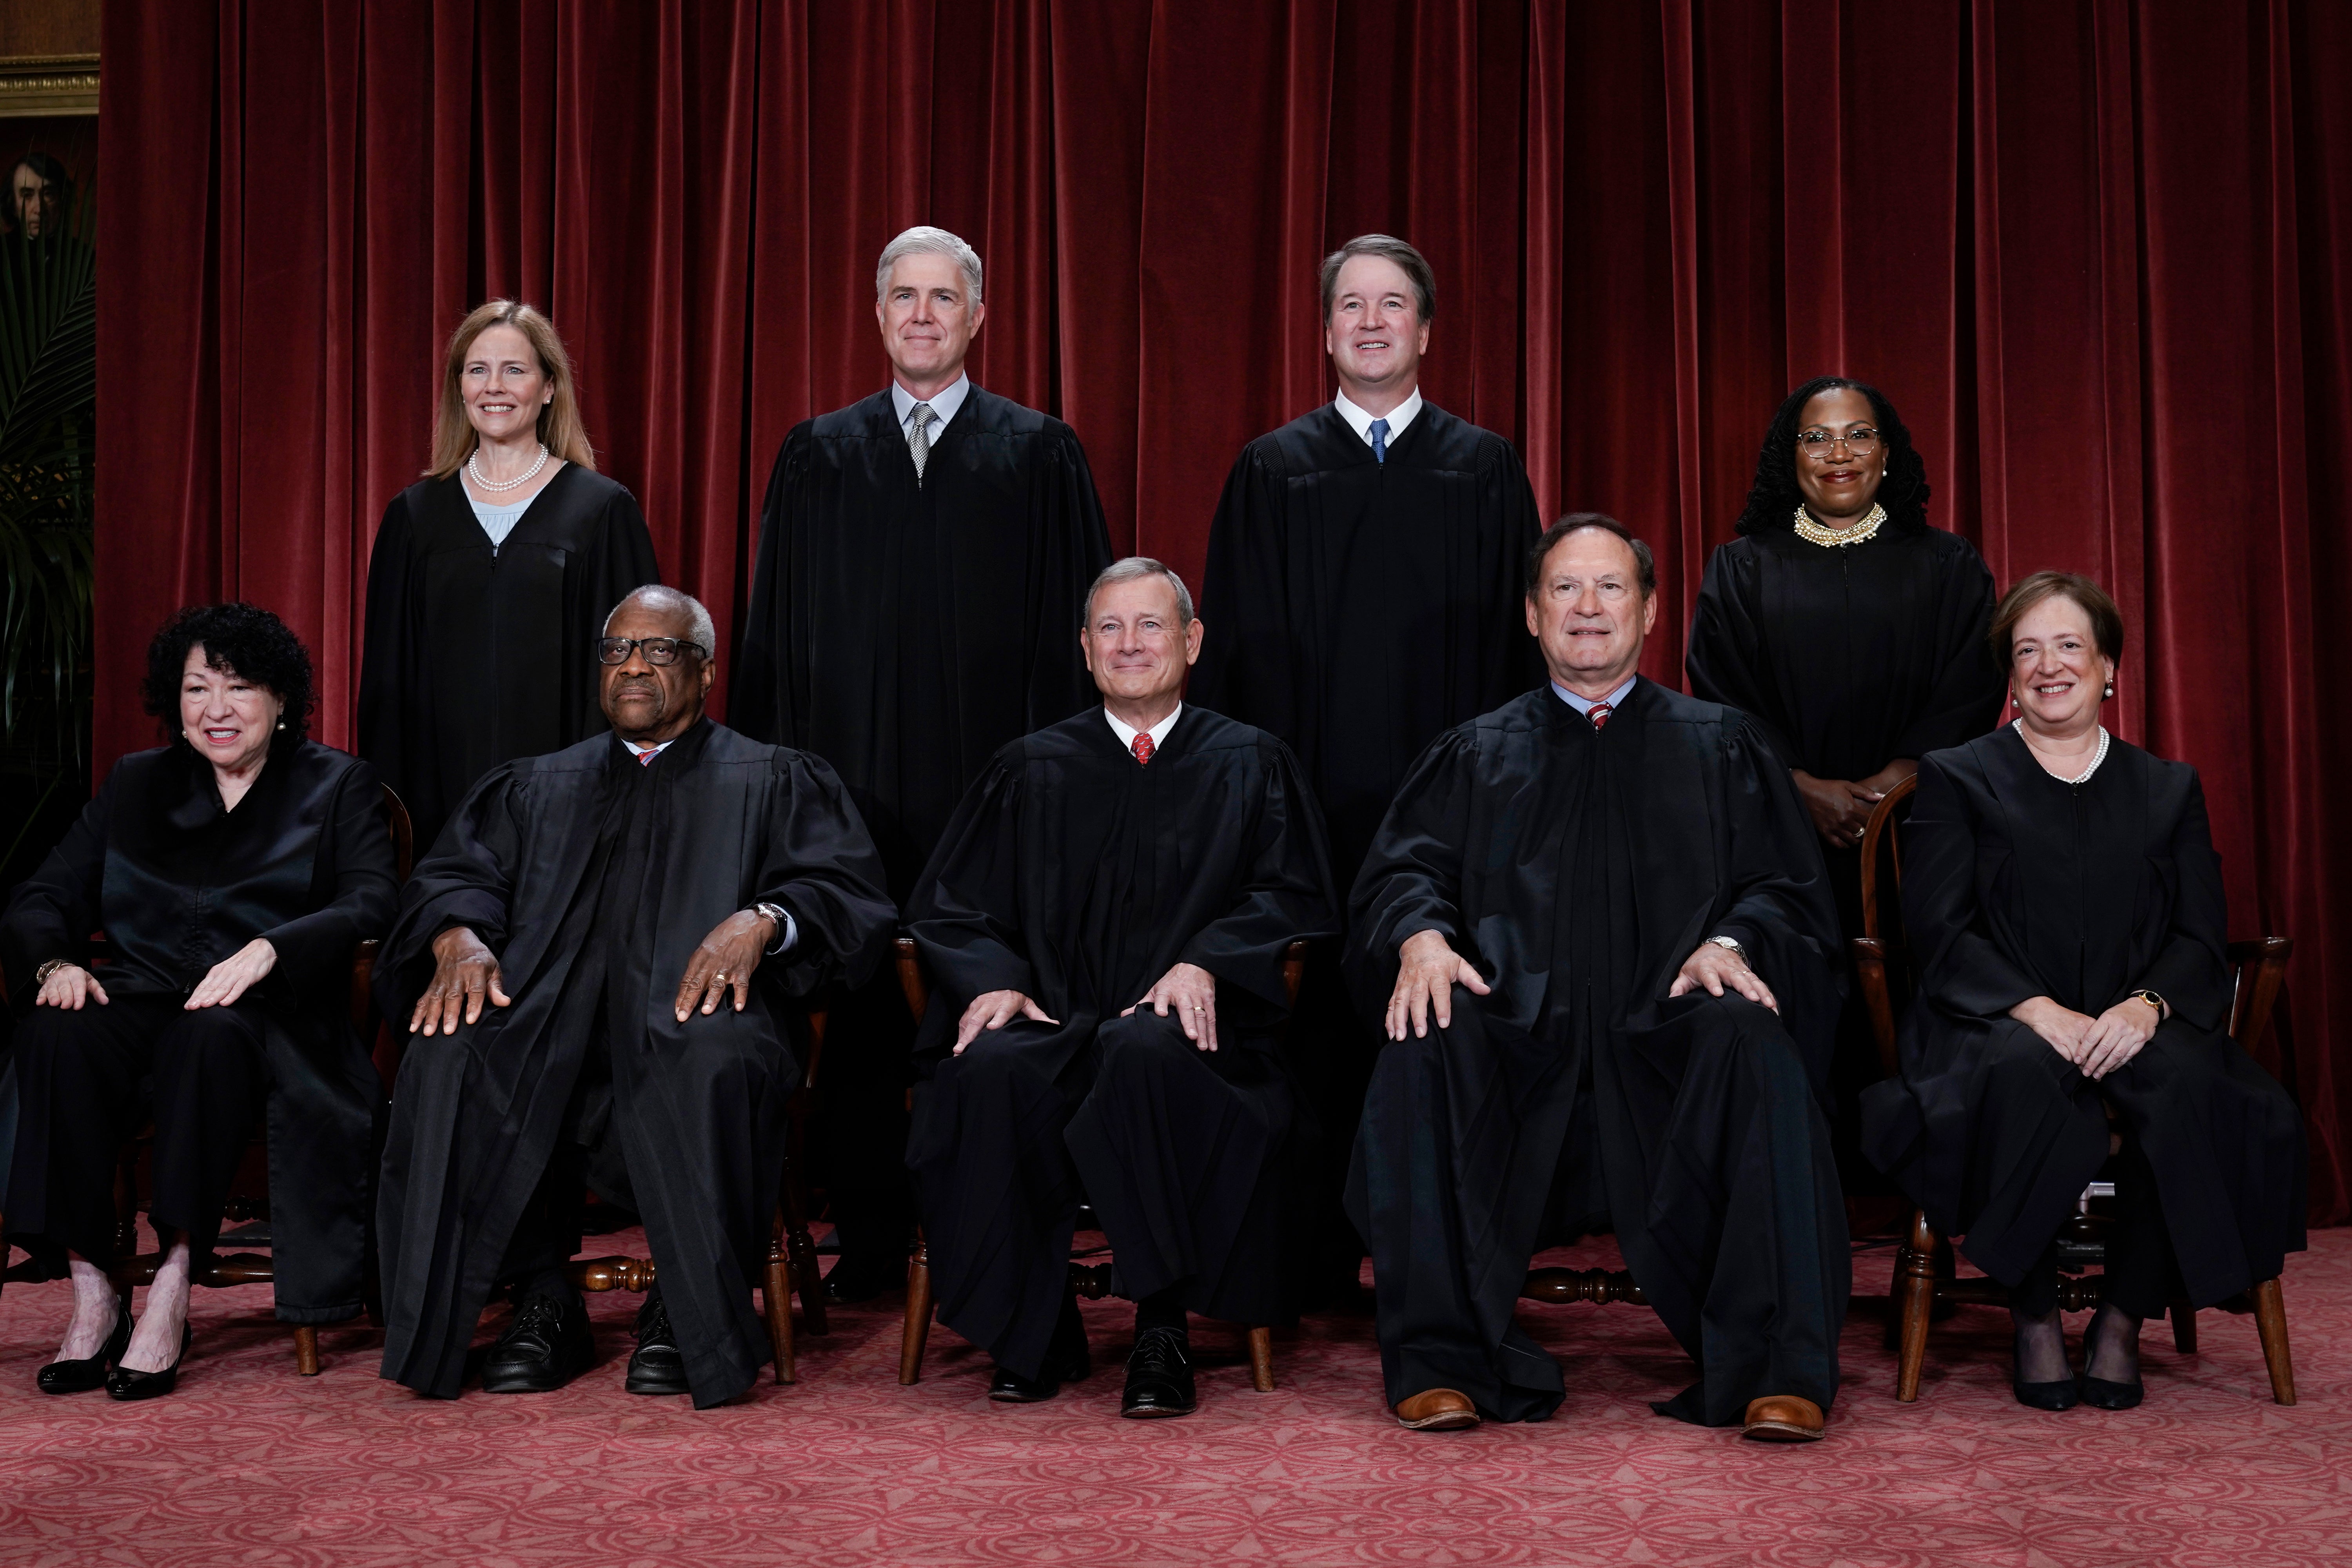 The Supreme Court justices